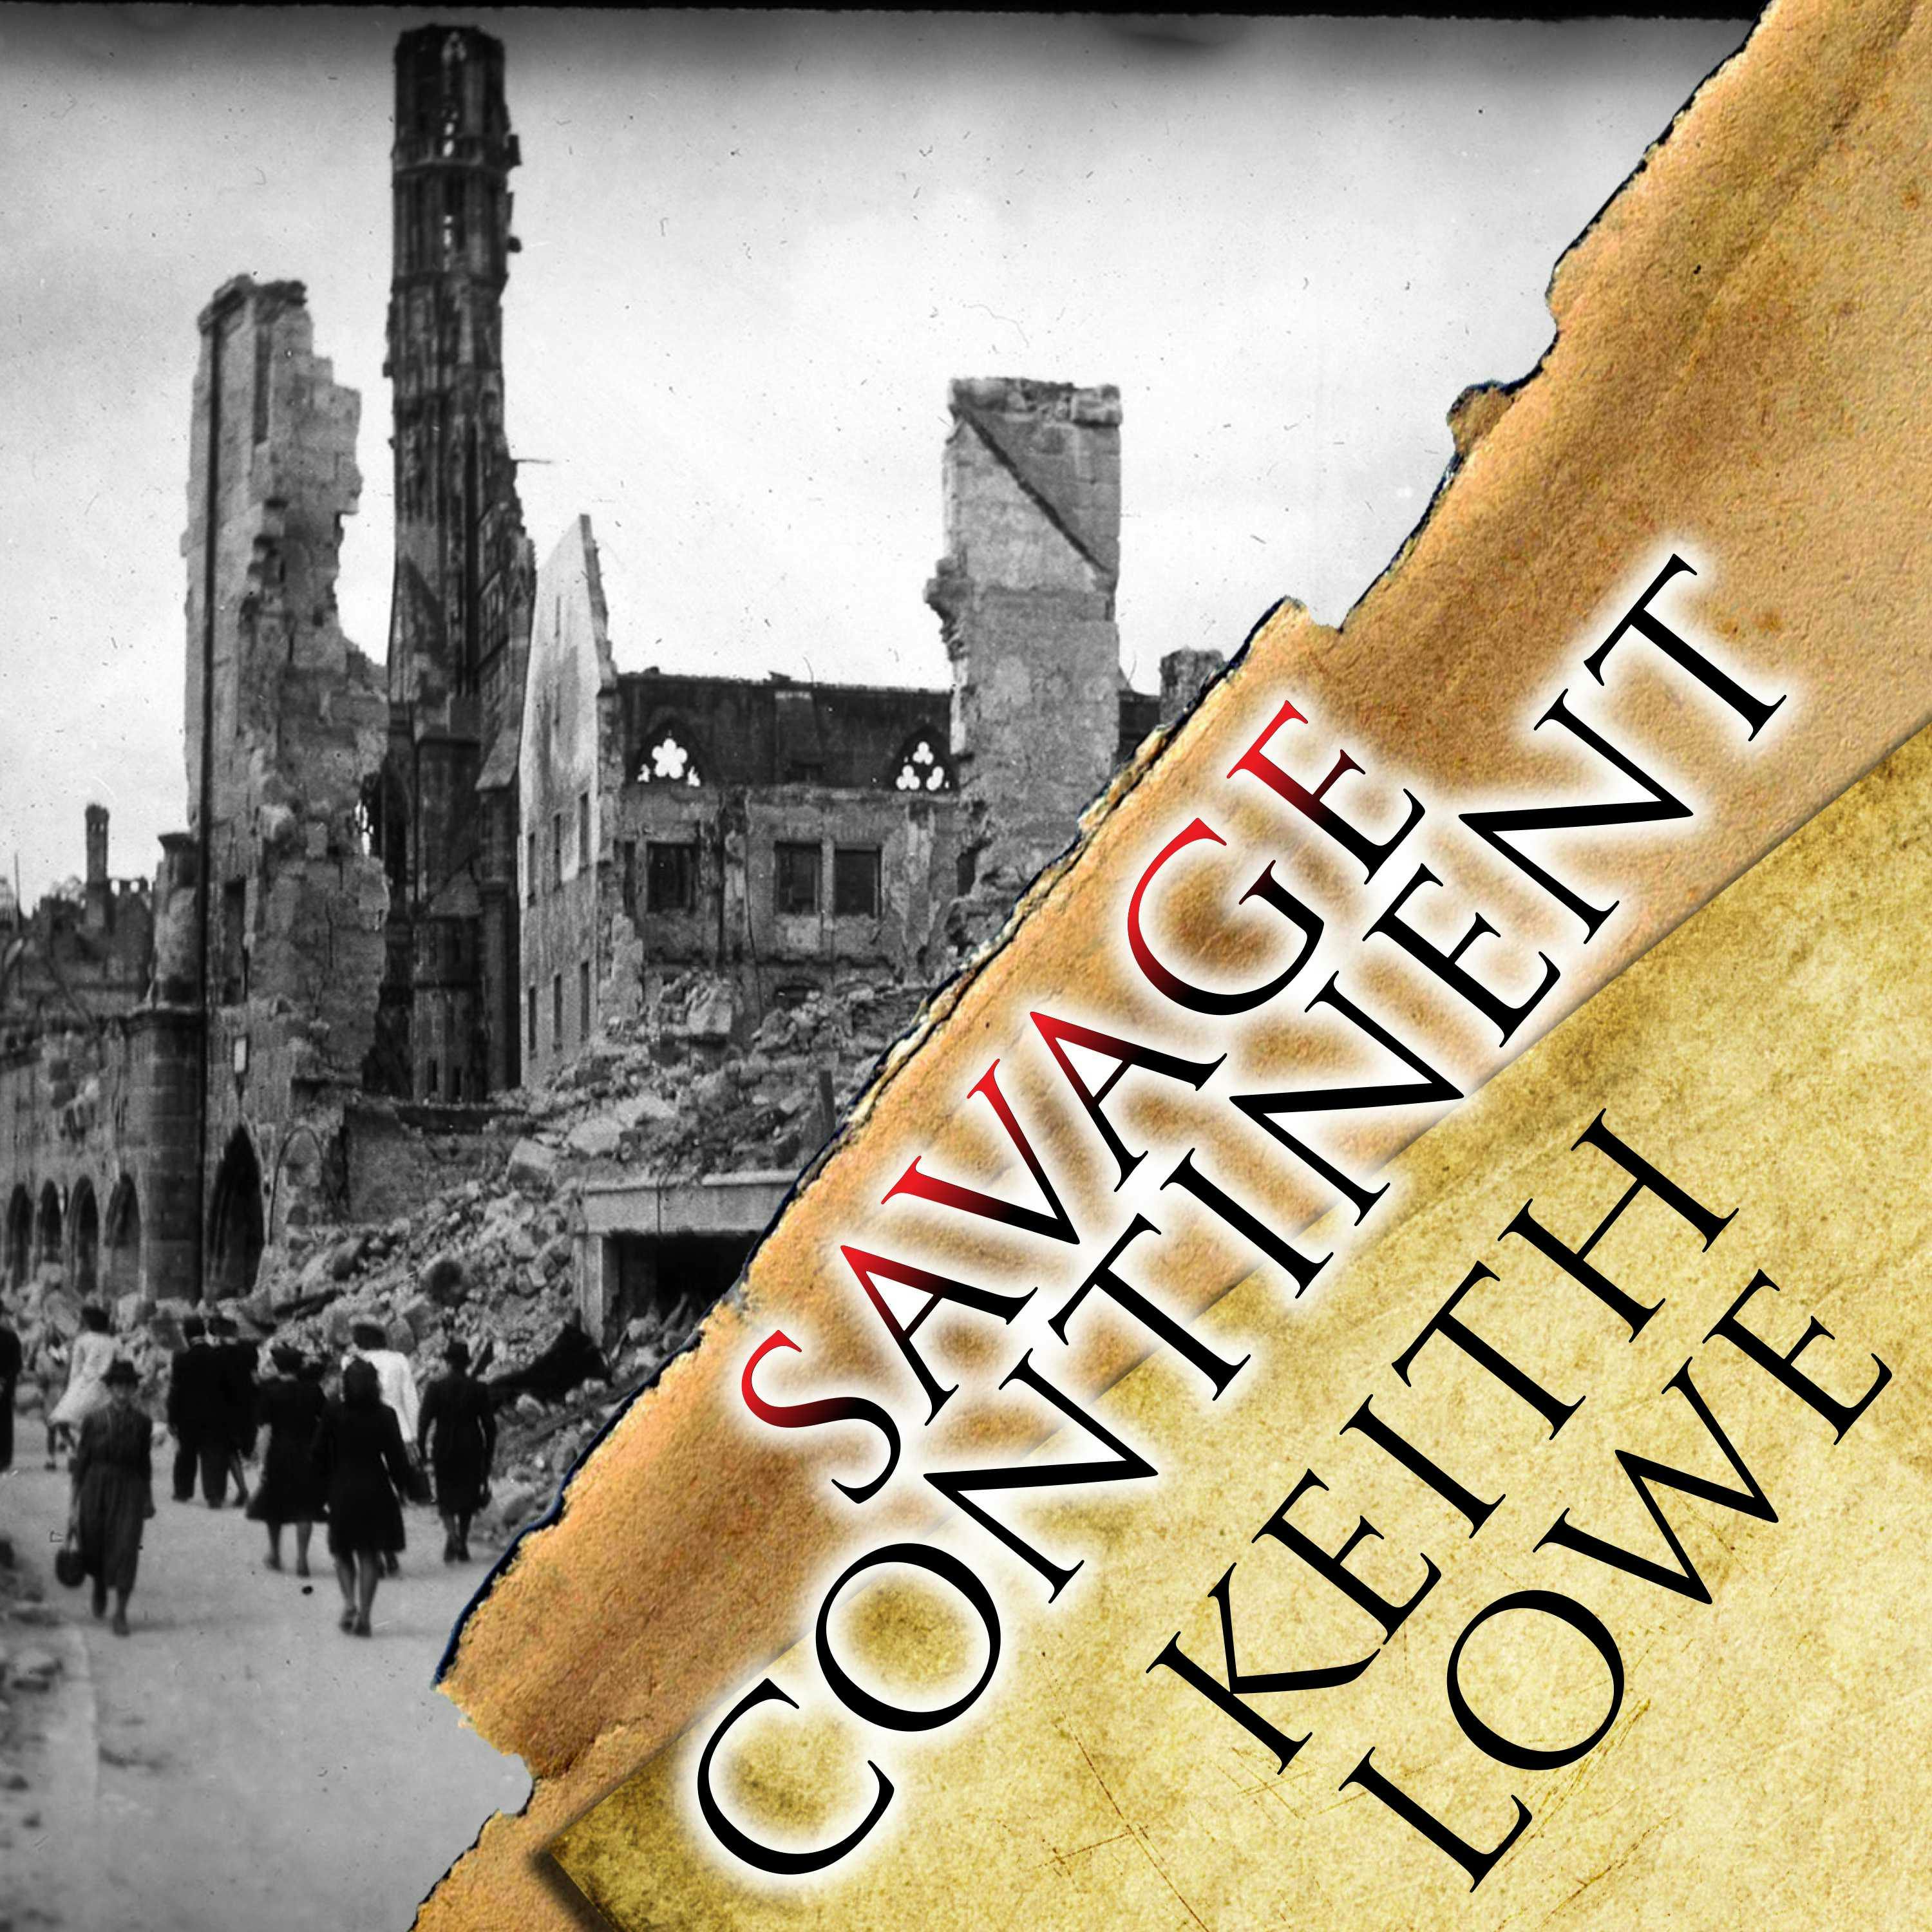 Savage Continent: Europe in the Aftermath of World War II - Keith Lowe